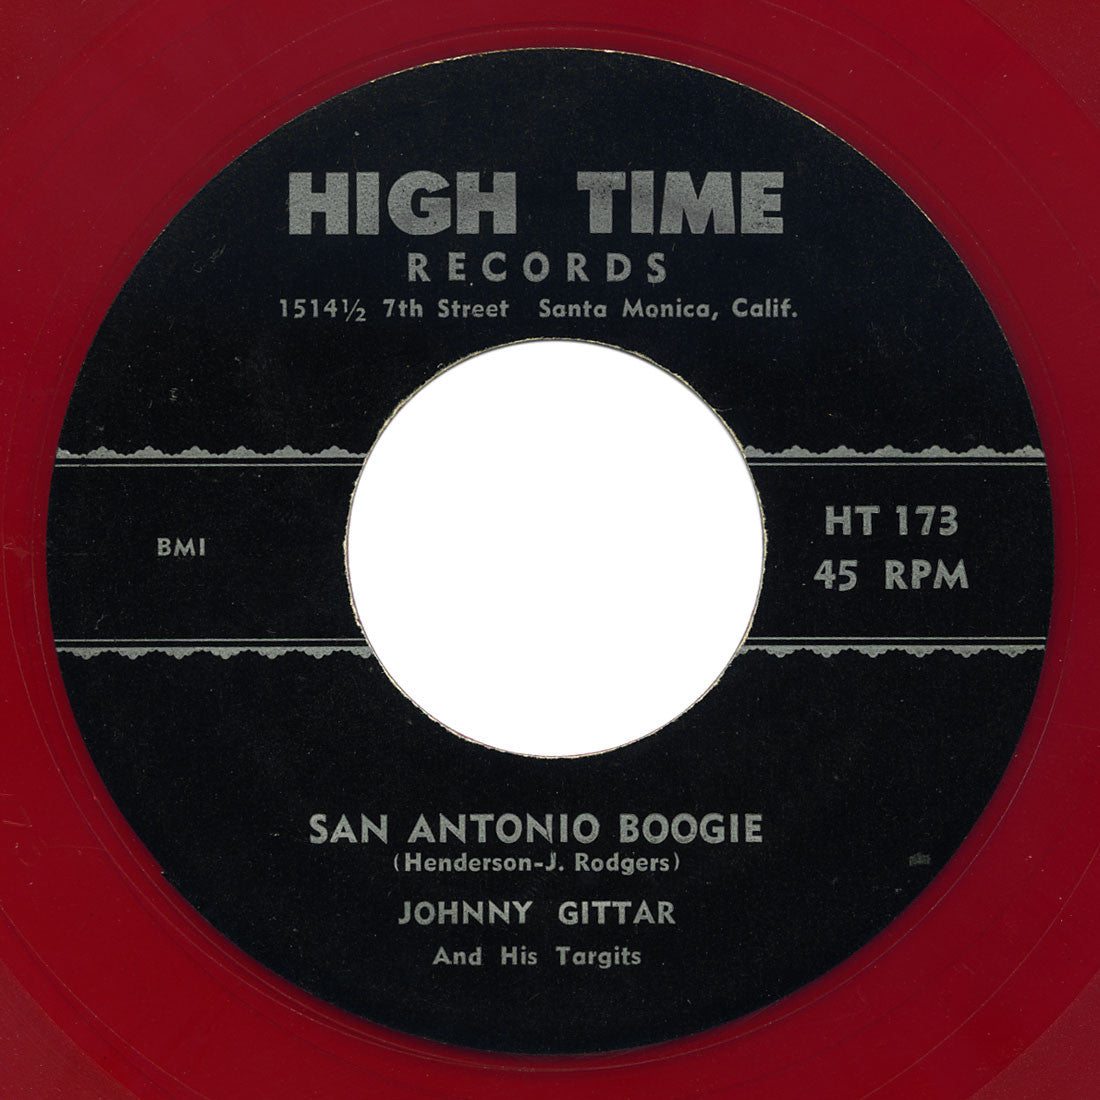 Johnny Gittar and his Targits - San Antonio Boogie / You Only Hurt My Pride - High Time